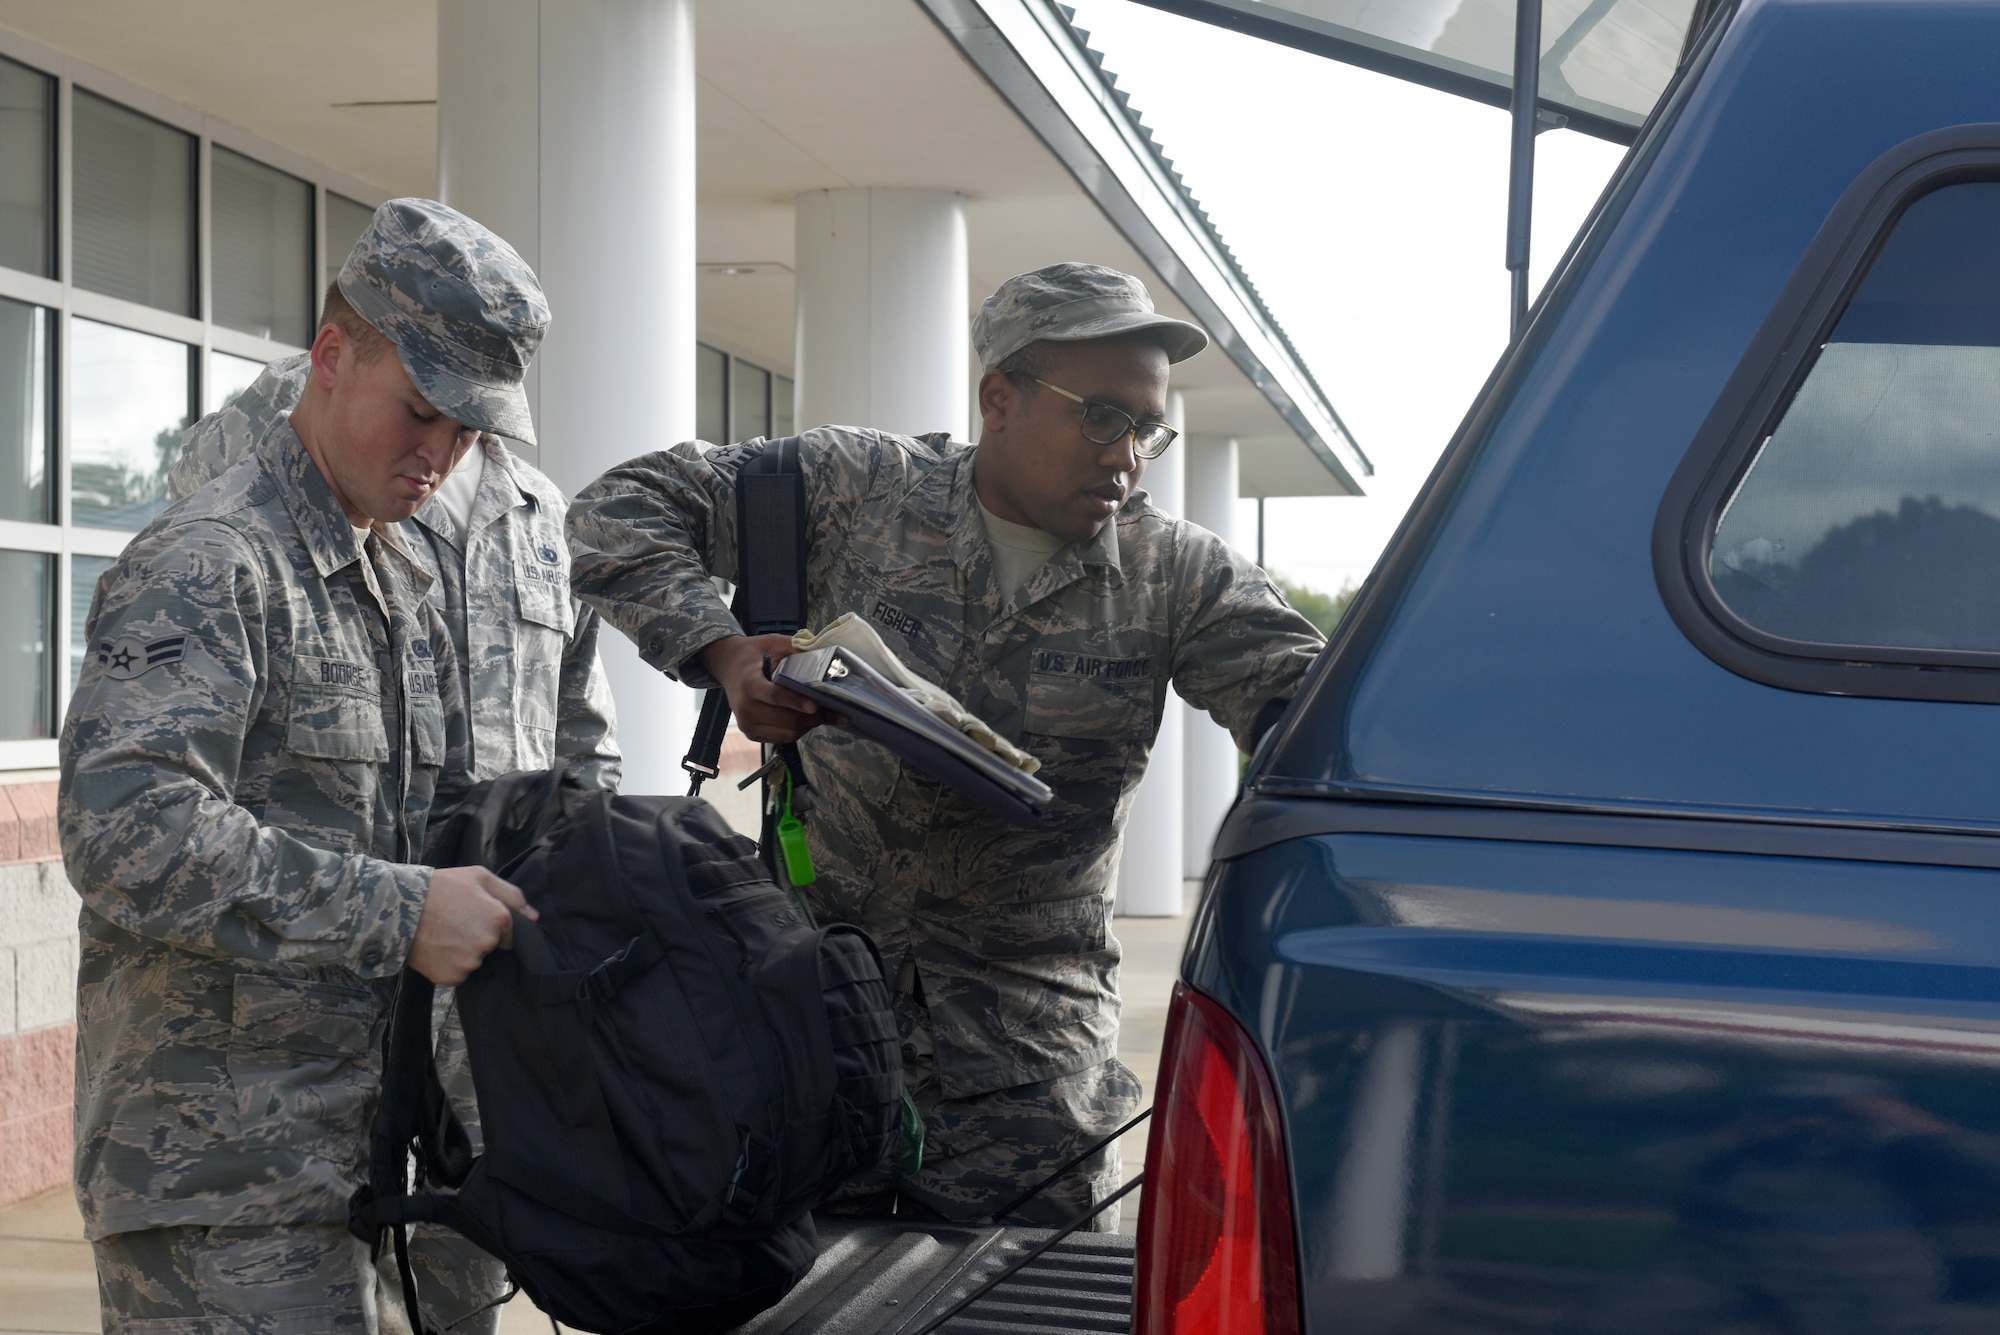 North Carolina Air National Guardsmen assigned to the 145th Logistics Readiness Squadron (LRS), load a truck with gear for an 11-person team ready to take party in Hurricane Florence Relief efforts at the North Carolina (N.C.) Air National Guard Base, Charlotte Douglas International Airport, Sept.17, 2018.  The 11-person team will create and move pallets filled with supplies like food and water in a Kinston, N.C. airport.